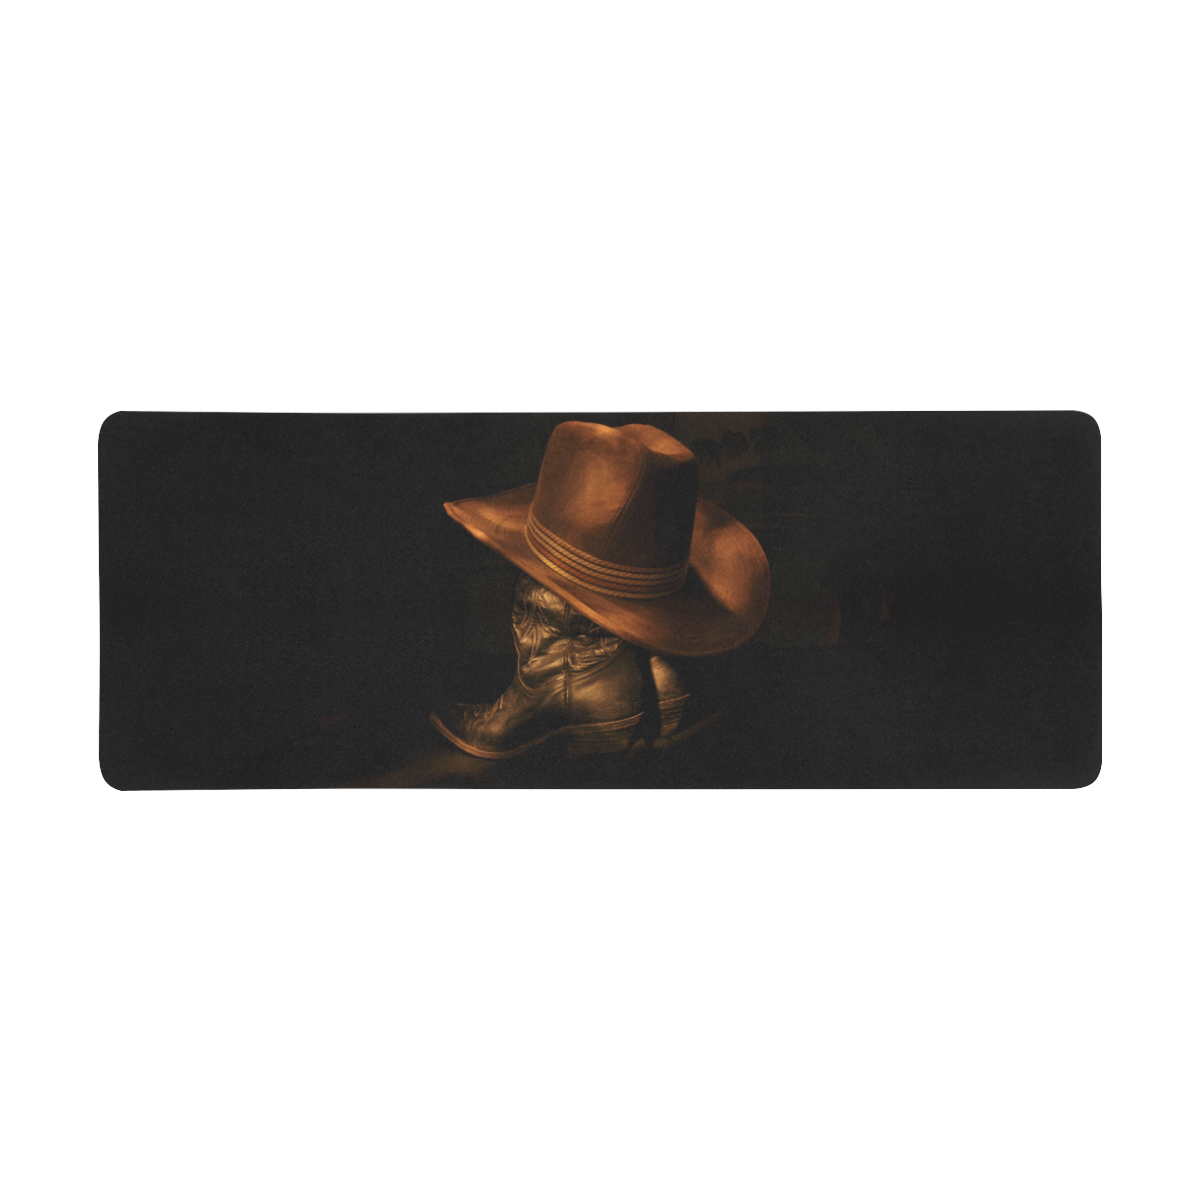 Cowboy Hat and Boots Gaming Mousepad (31"x12")